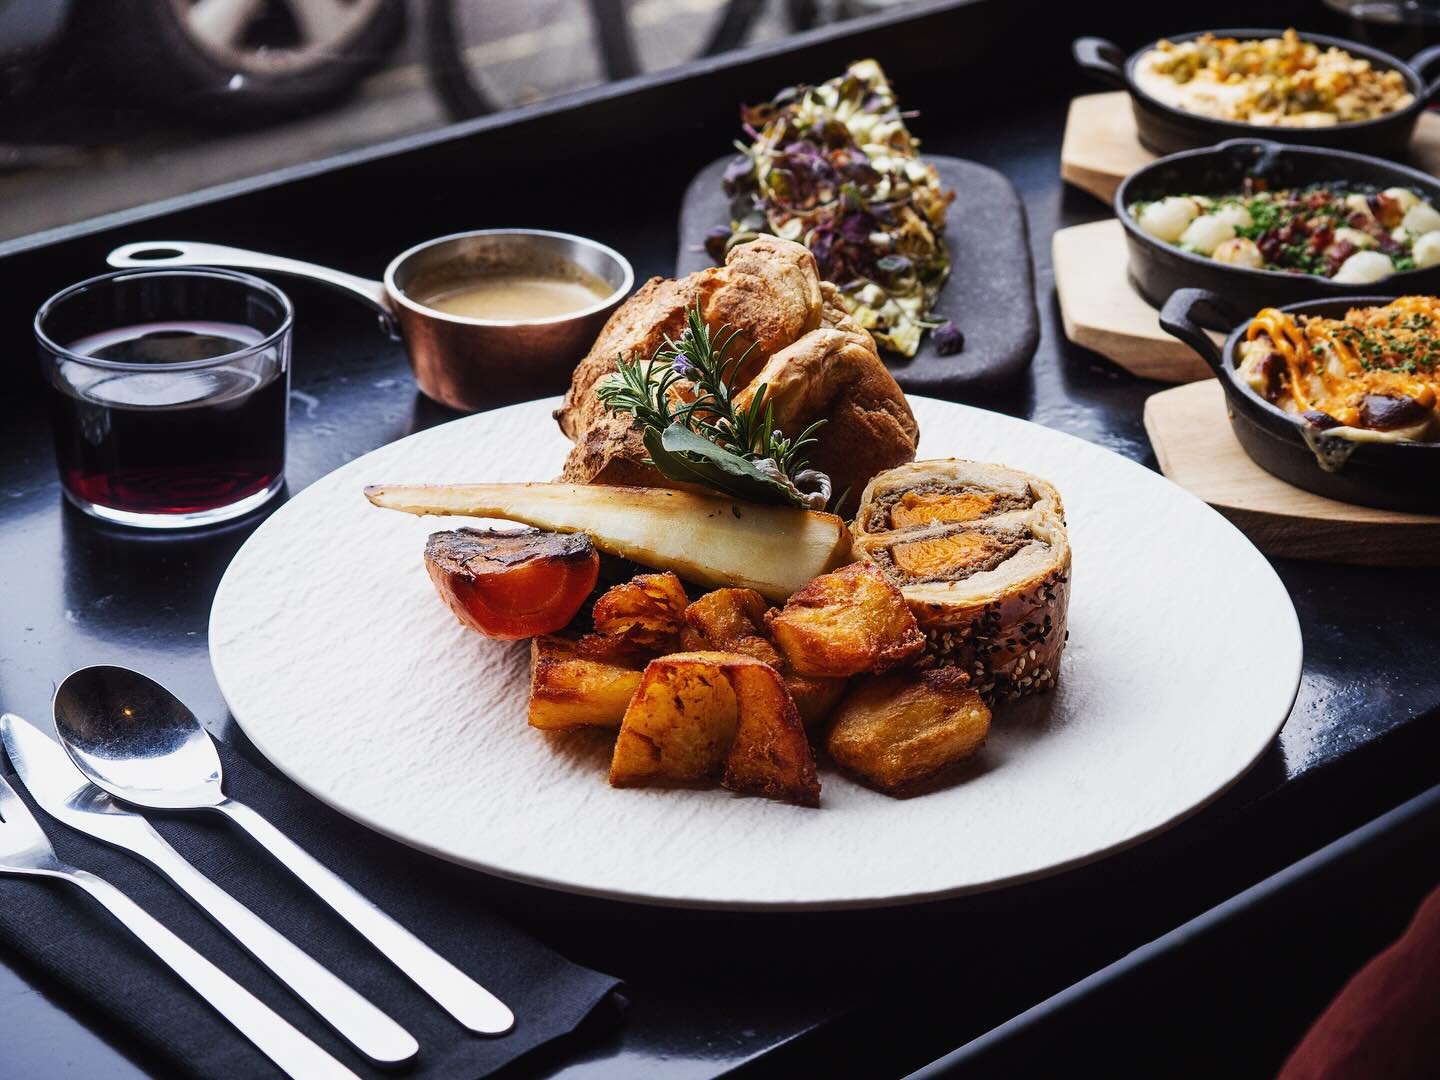 Have you heard about our Sunday Roast yet? Our wonderful creative Pablo came along with his lovely lady to try out our 12hr Slow Roast Szechuan Pork Belly &amp; our Vegan Roasted Squash Wellington with all the trimmings and all the sides of course. H